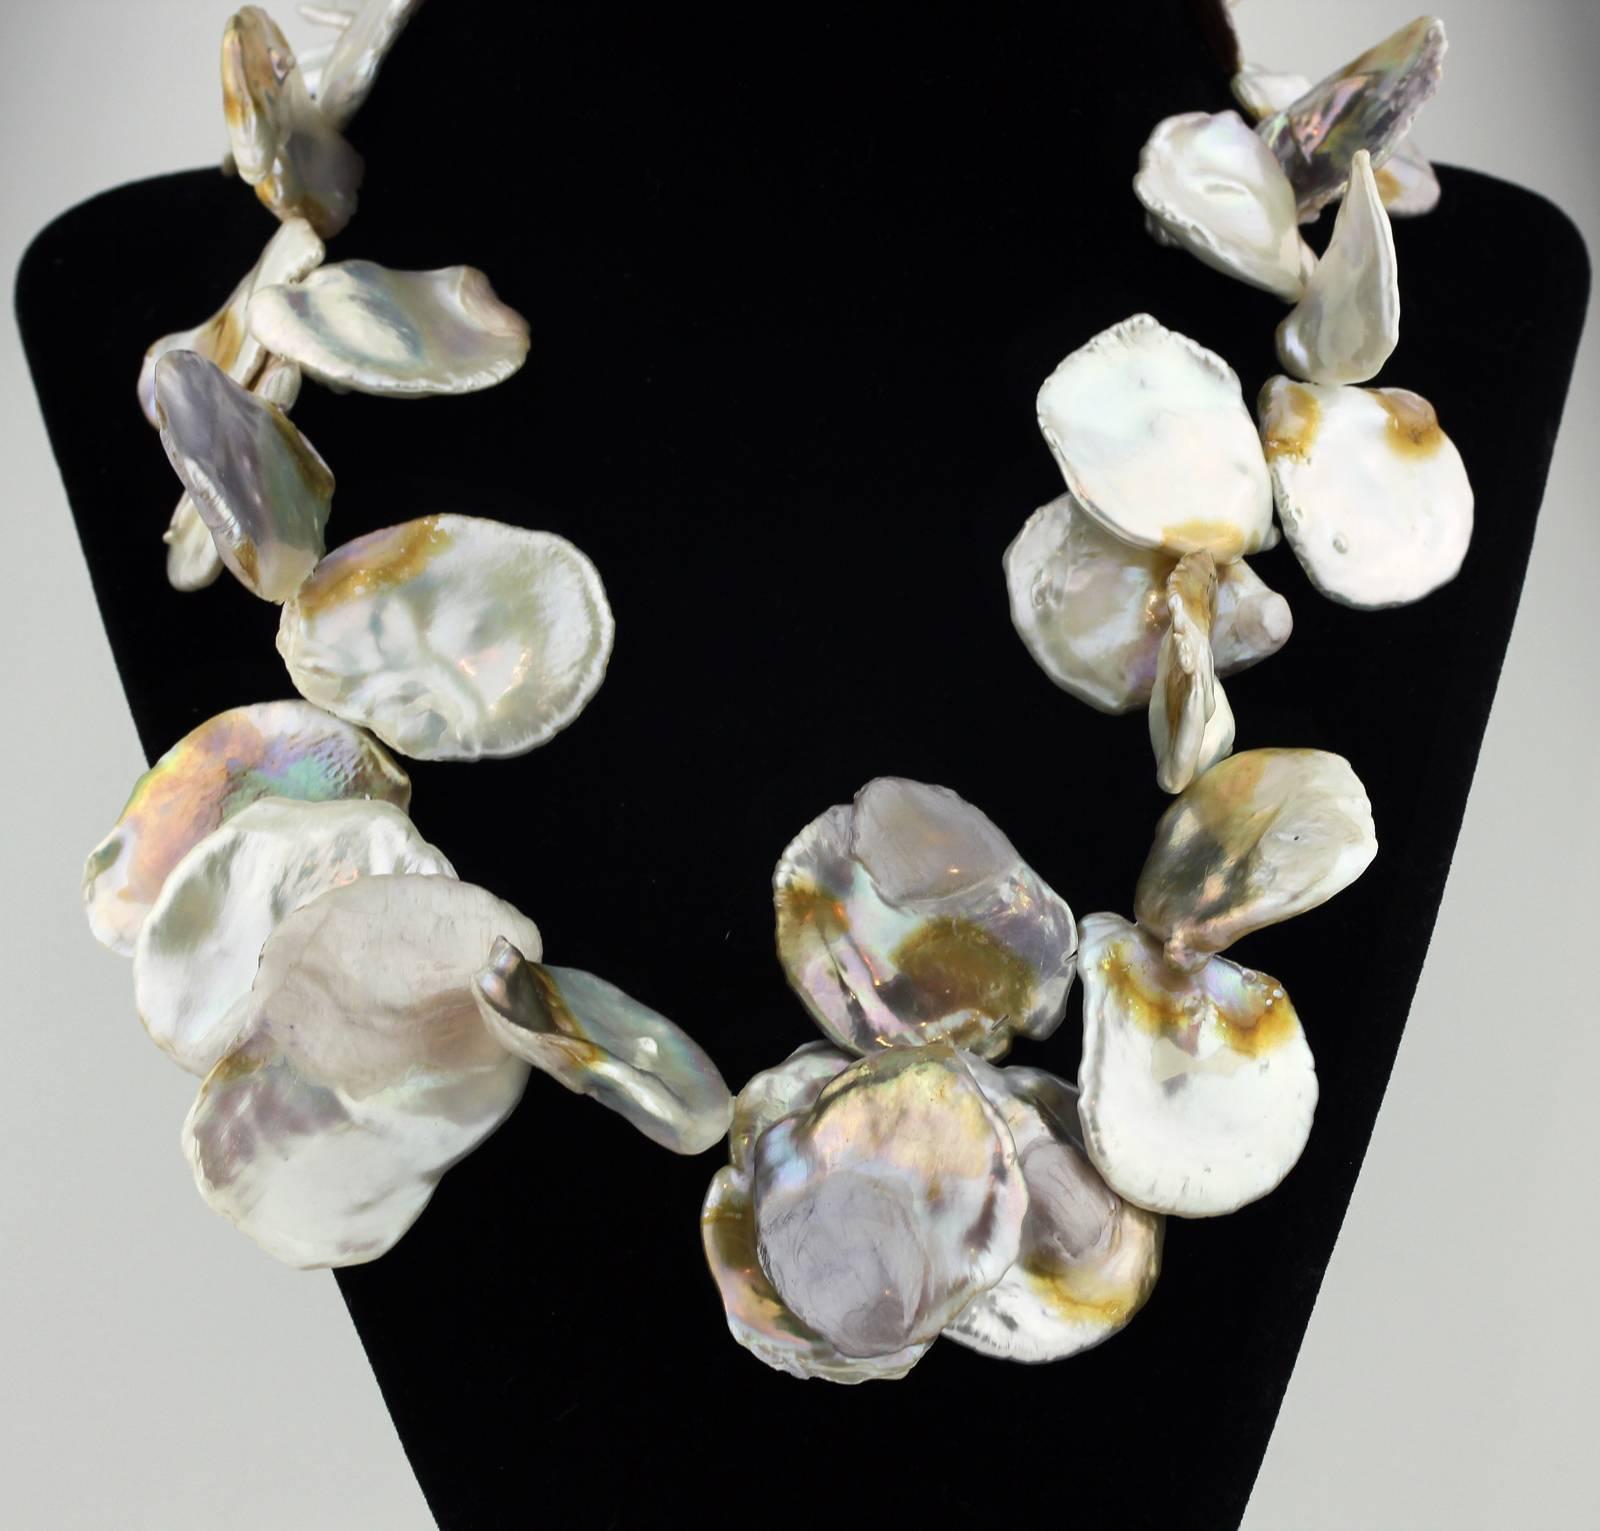 Mixed Cut Dramatic Chic One-of-a-Kind Irridescent Real Keshi Pearl Necklace